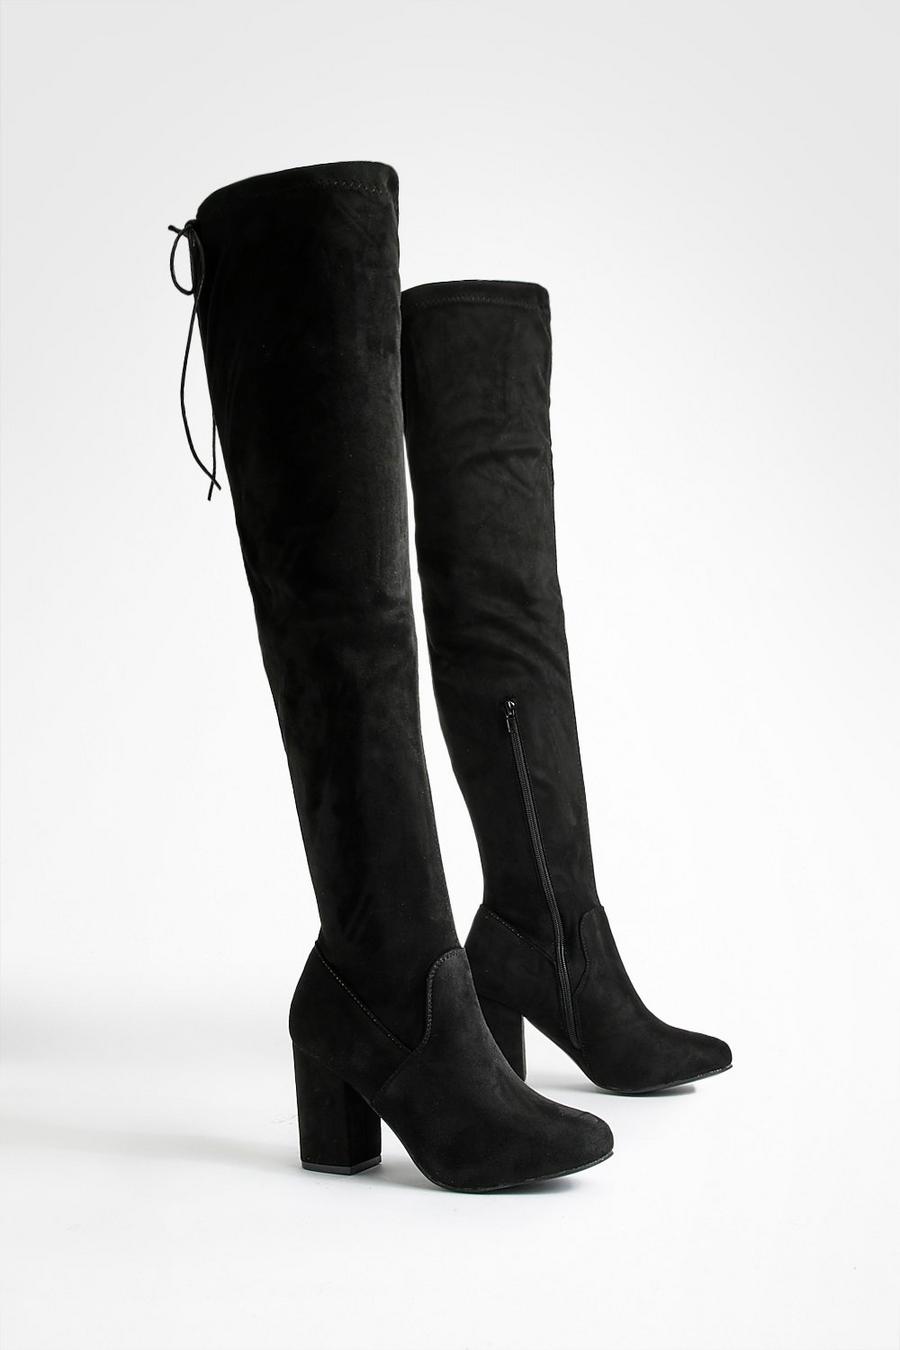 Black Wide Fit Thigh High Block Heel Boots